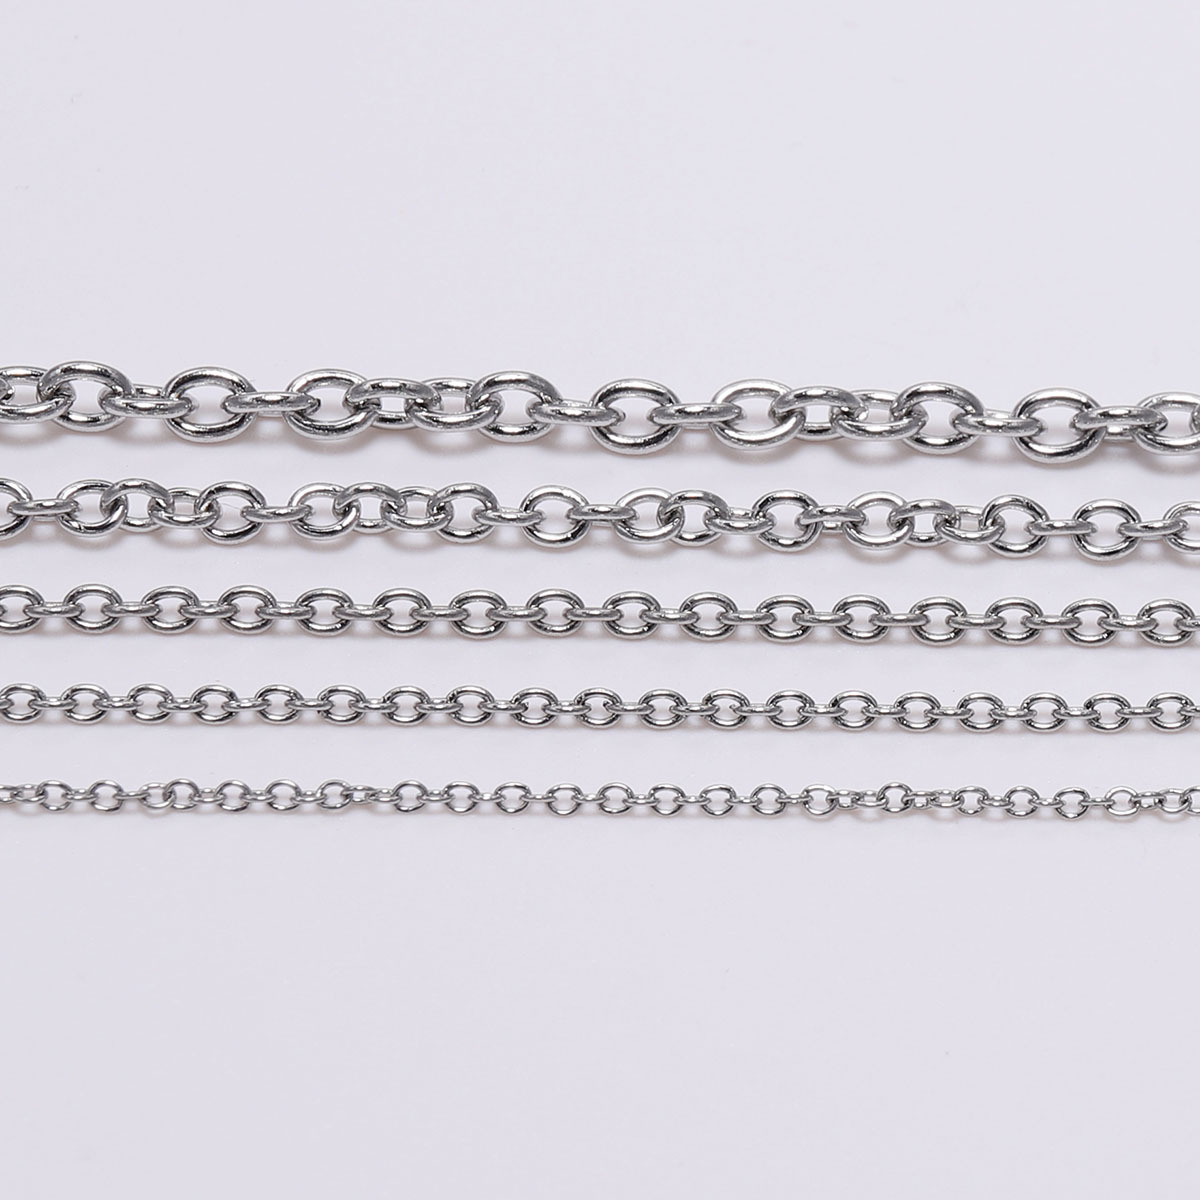 

1roll 5meter/lot Cross Stainless Steel Necklaces Chains Bulk Link Chain 1.2/1.6/2/2.5/3mm For Diy Jewelry Making Findings Accessories